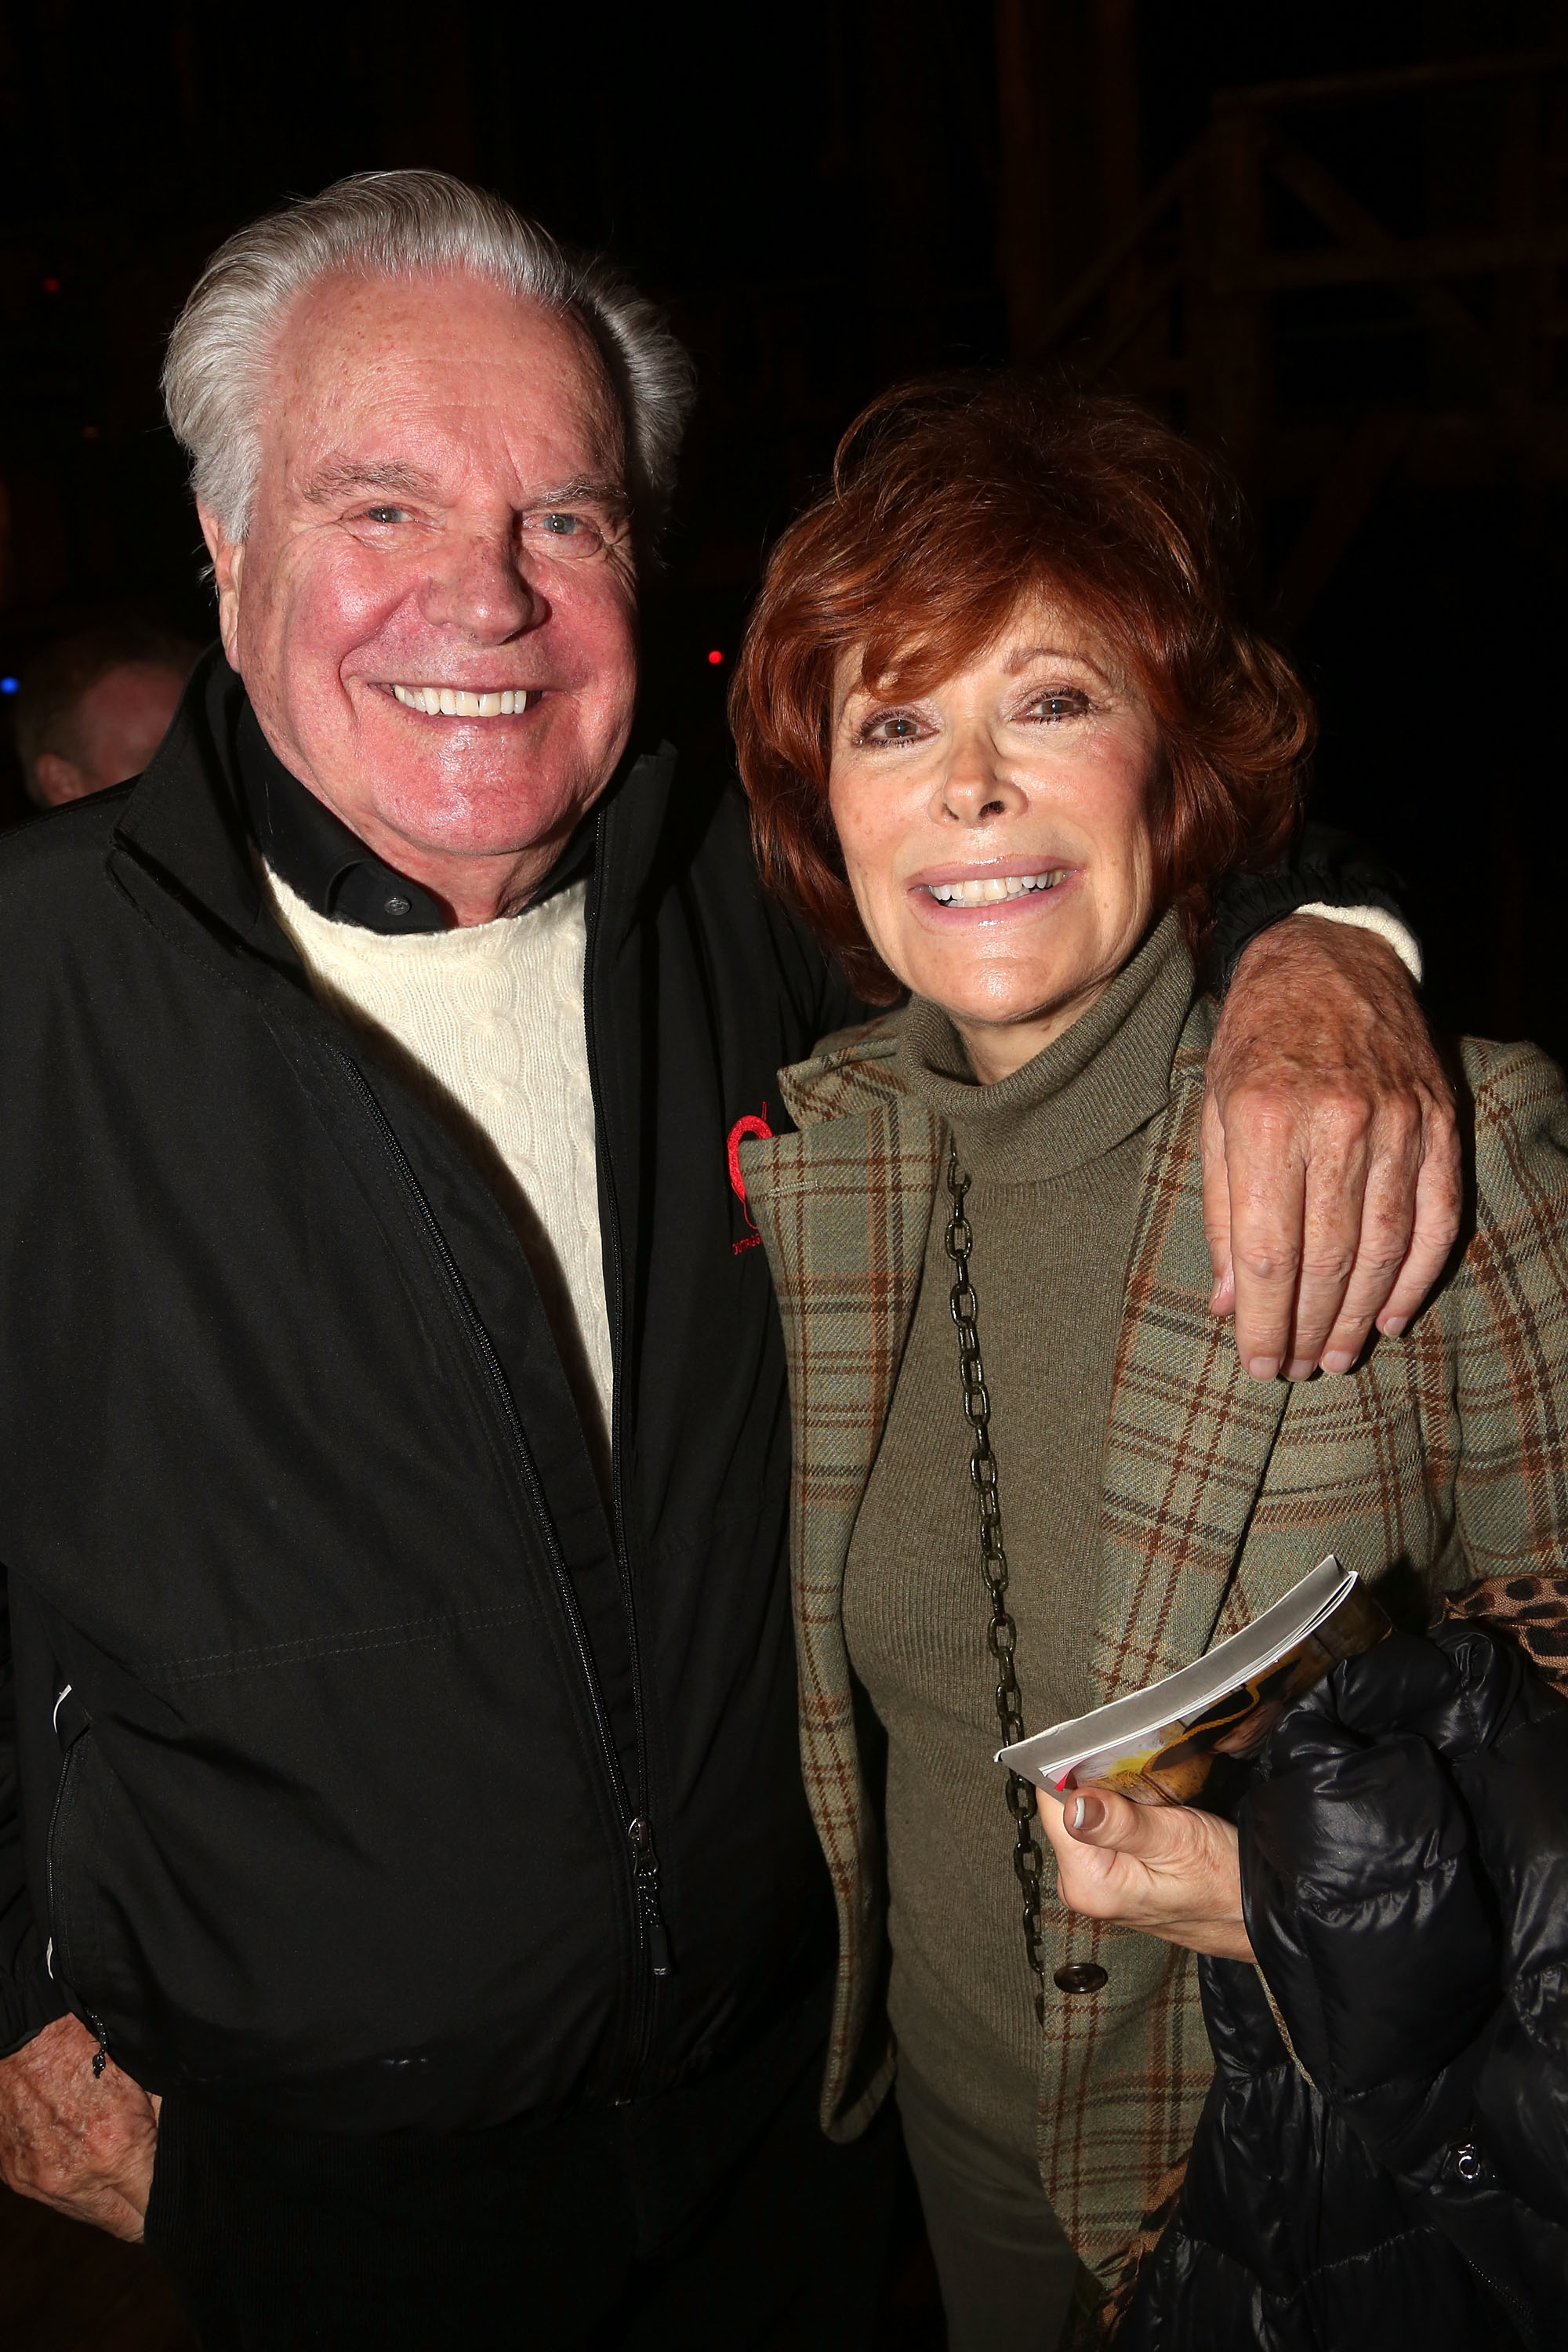 Robert Wagner and his wife Jill St. John pose backstage at the hit musical "Hamilton" on Broadway at The Richard Rogers Theater on October 28, 2015 in New York City | Source: Getty Images